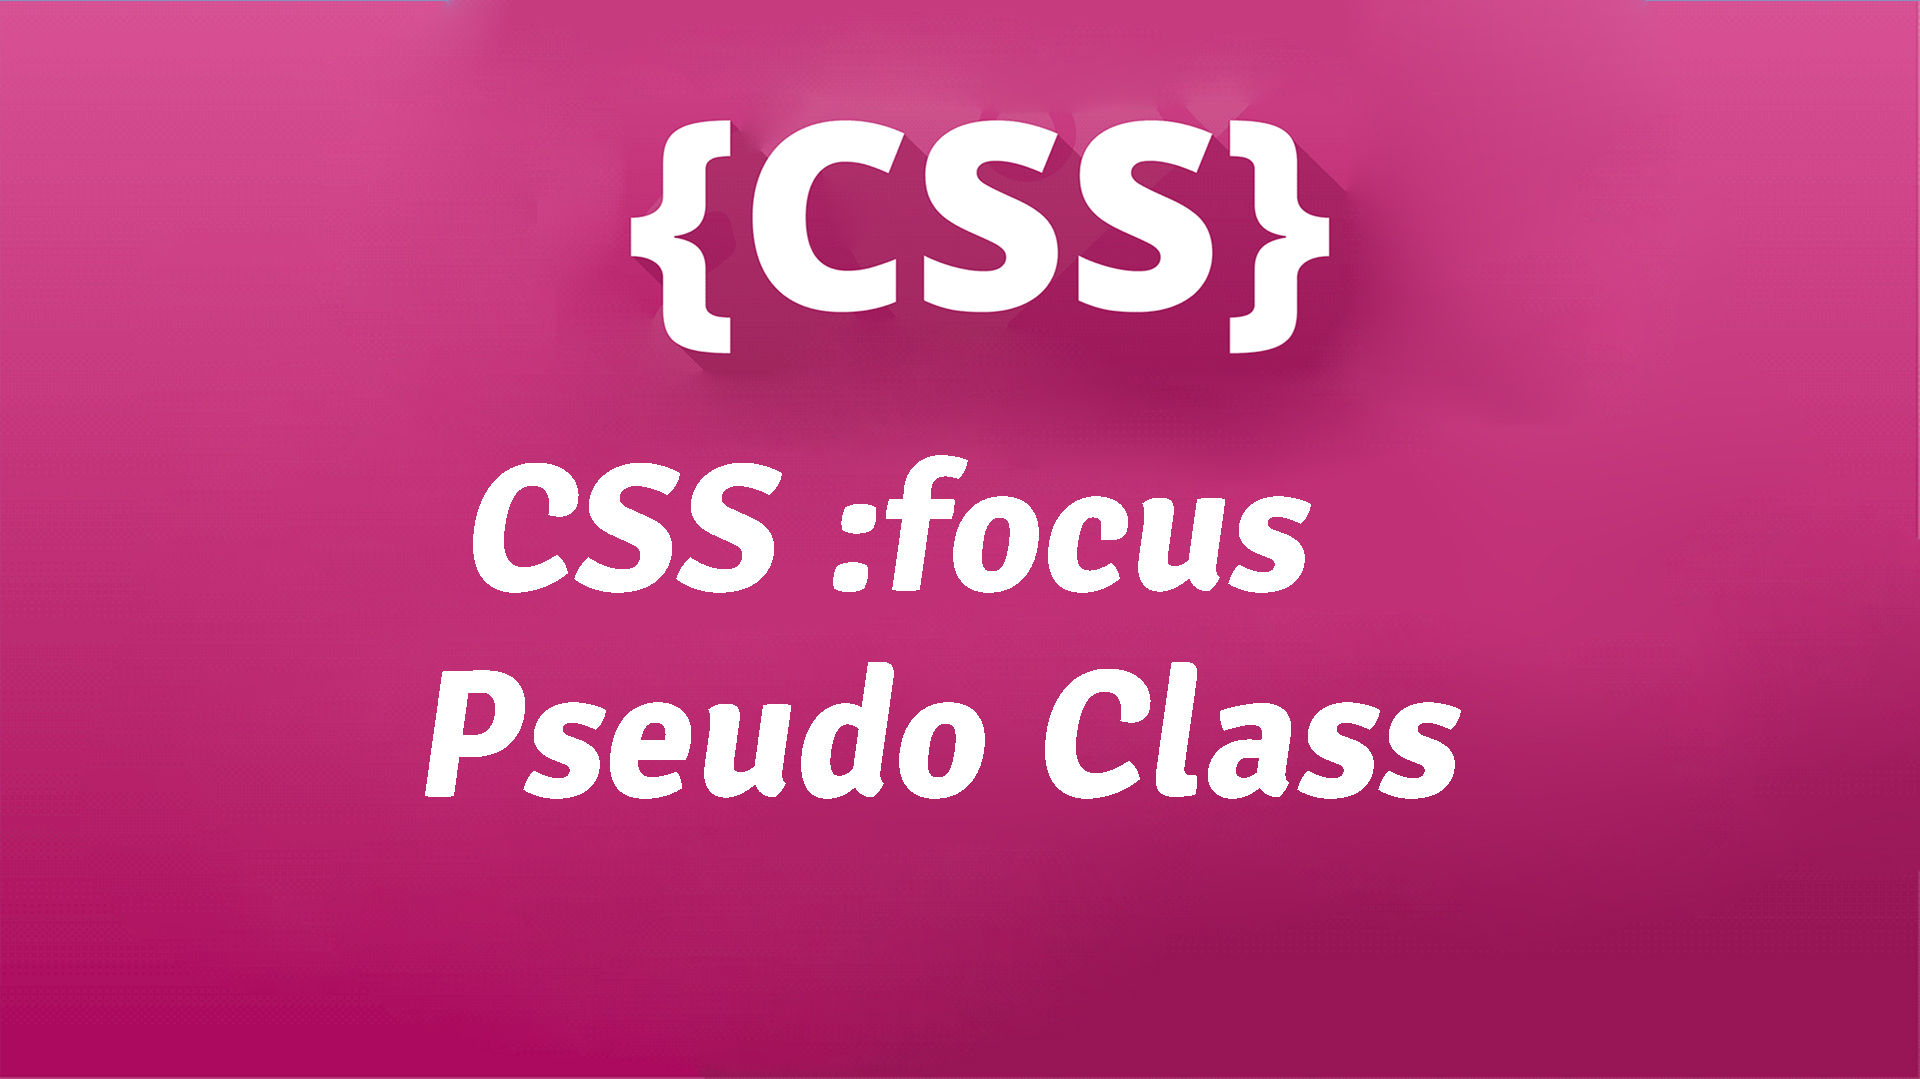 Enable css